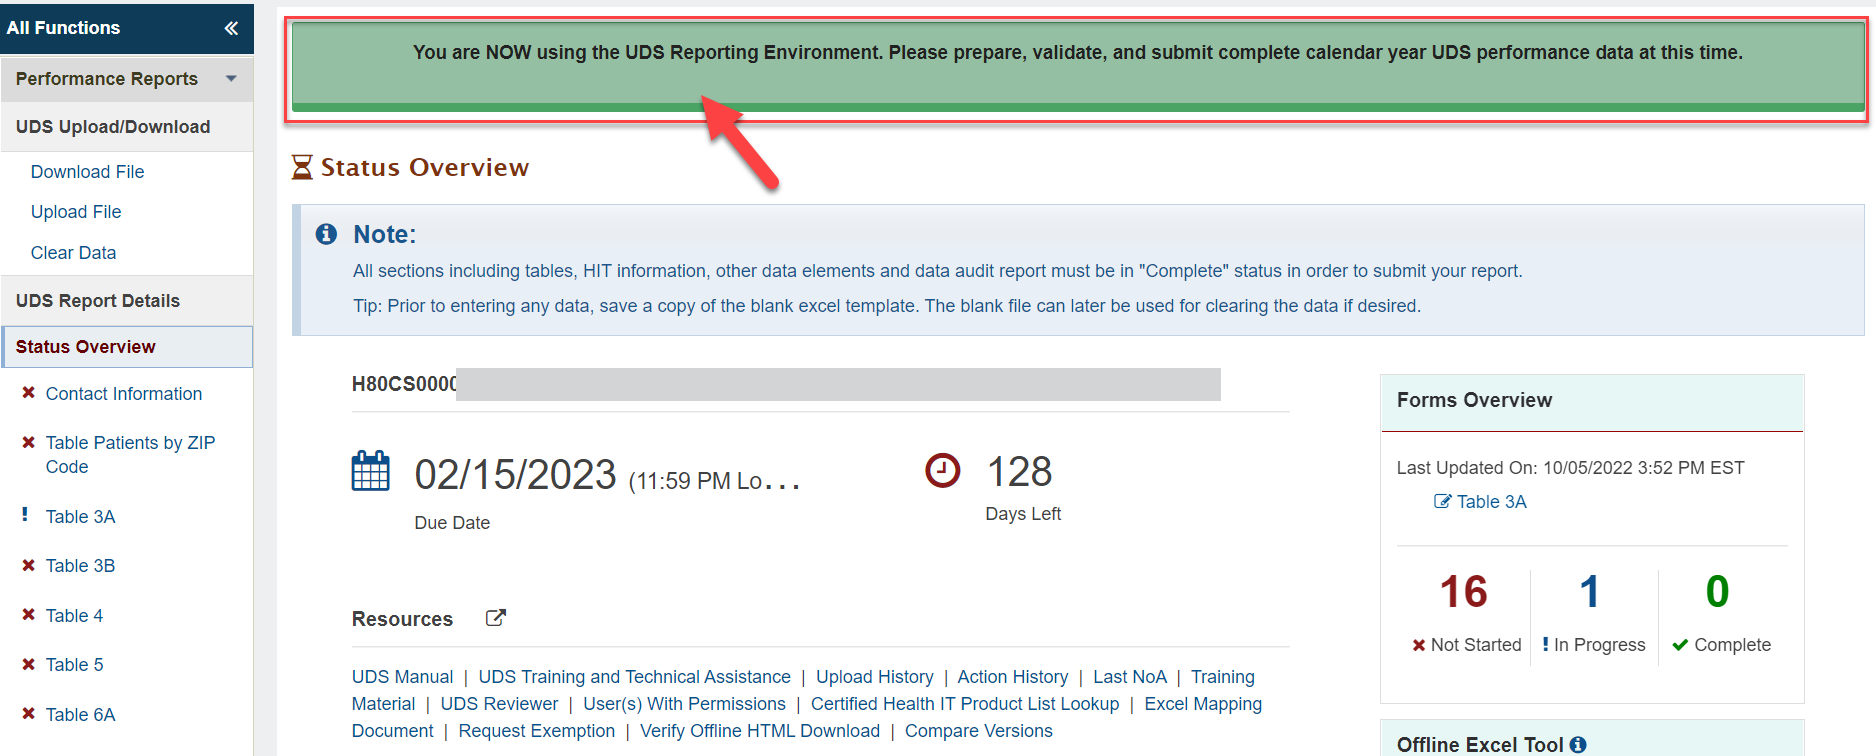 Screenshot of the Status Overview page with the message to indicate the UDS Reporting Environment and that the report can be submitted